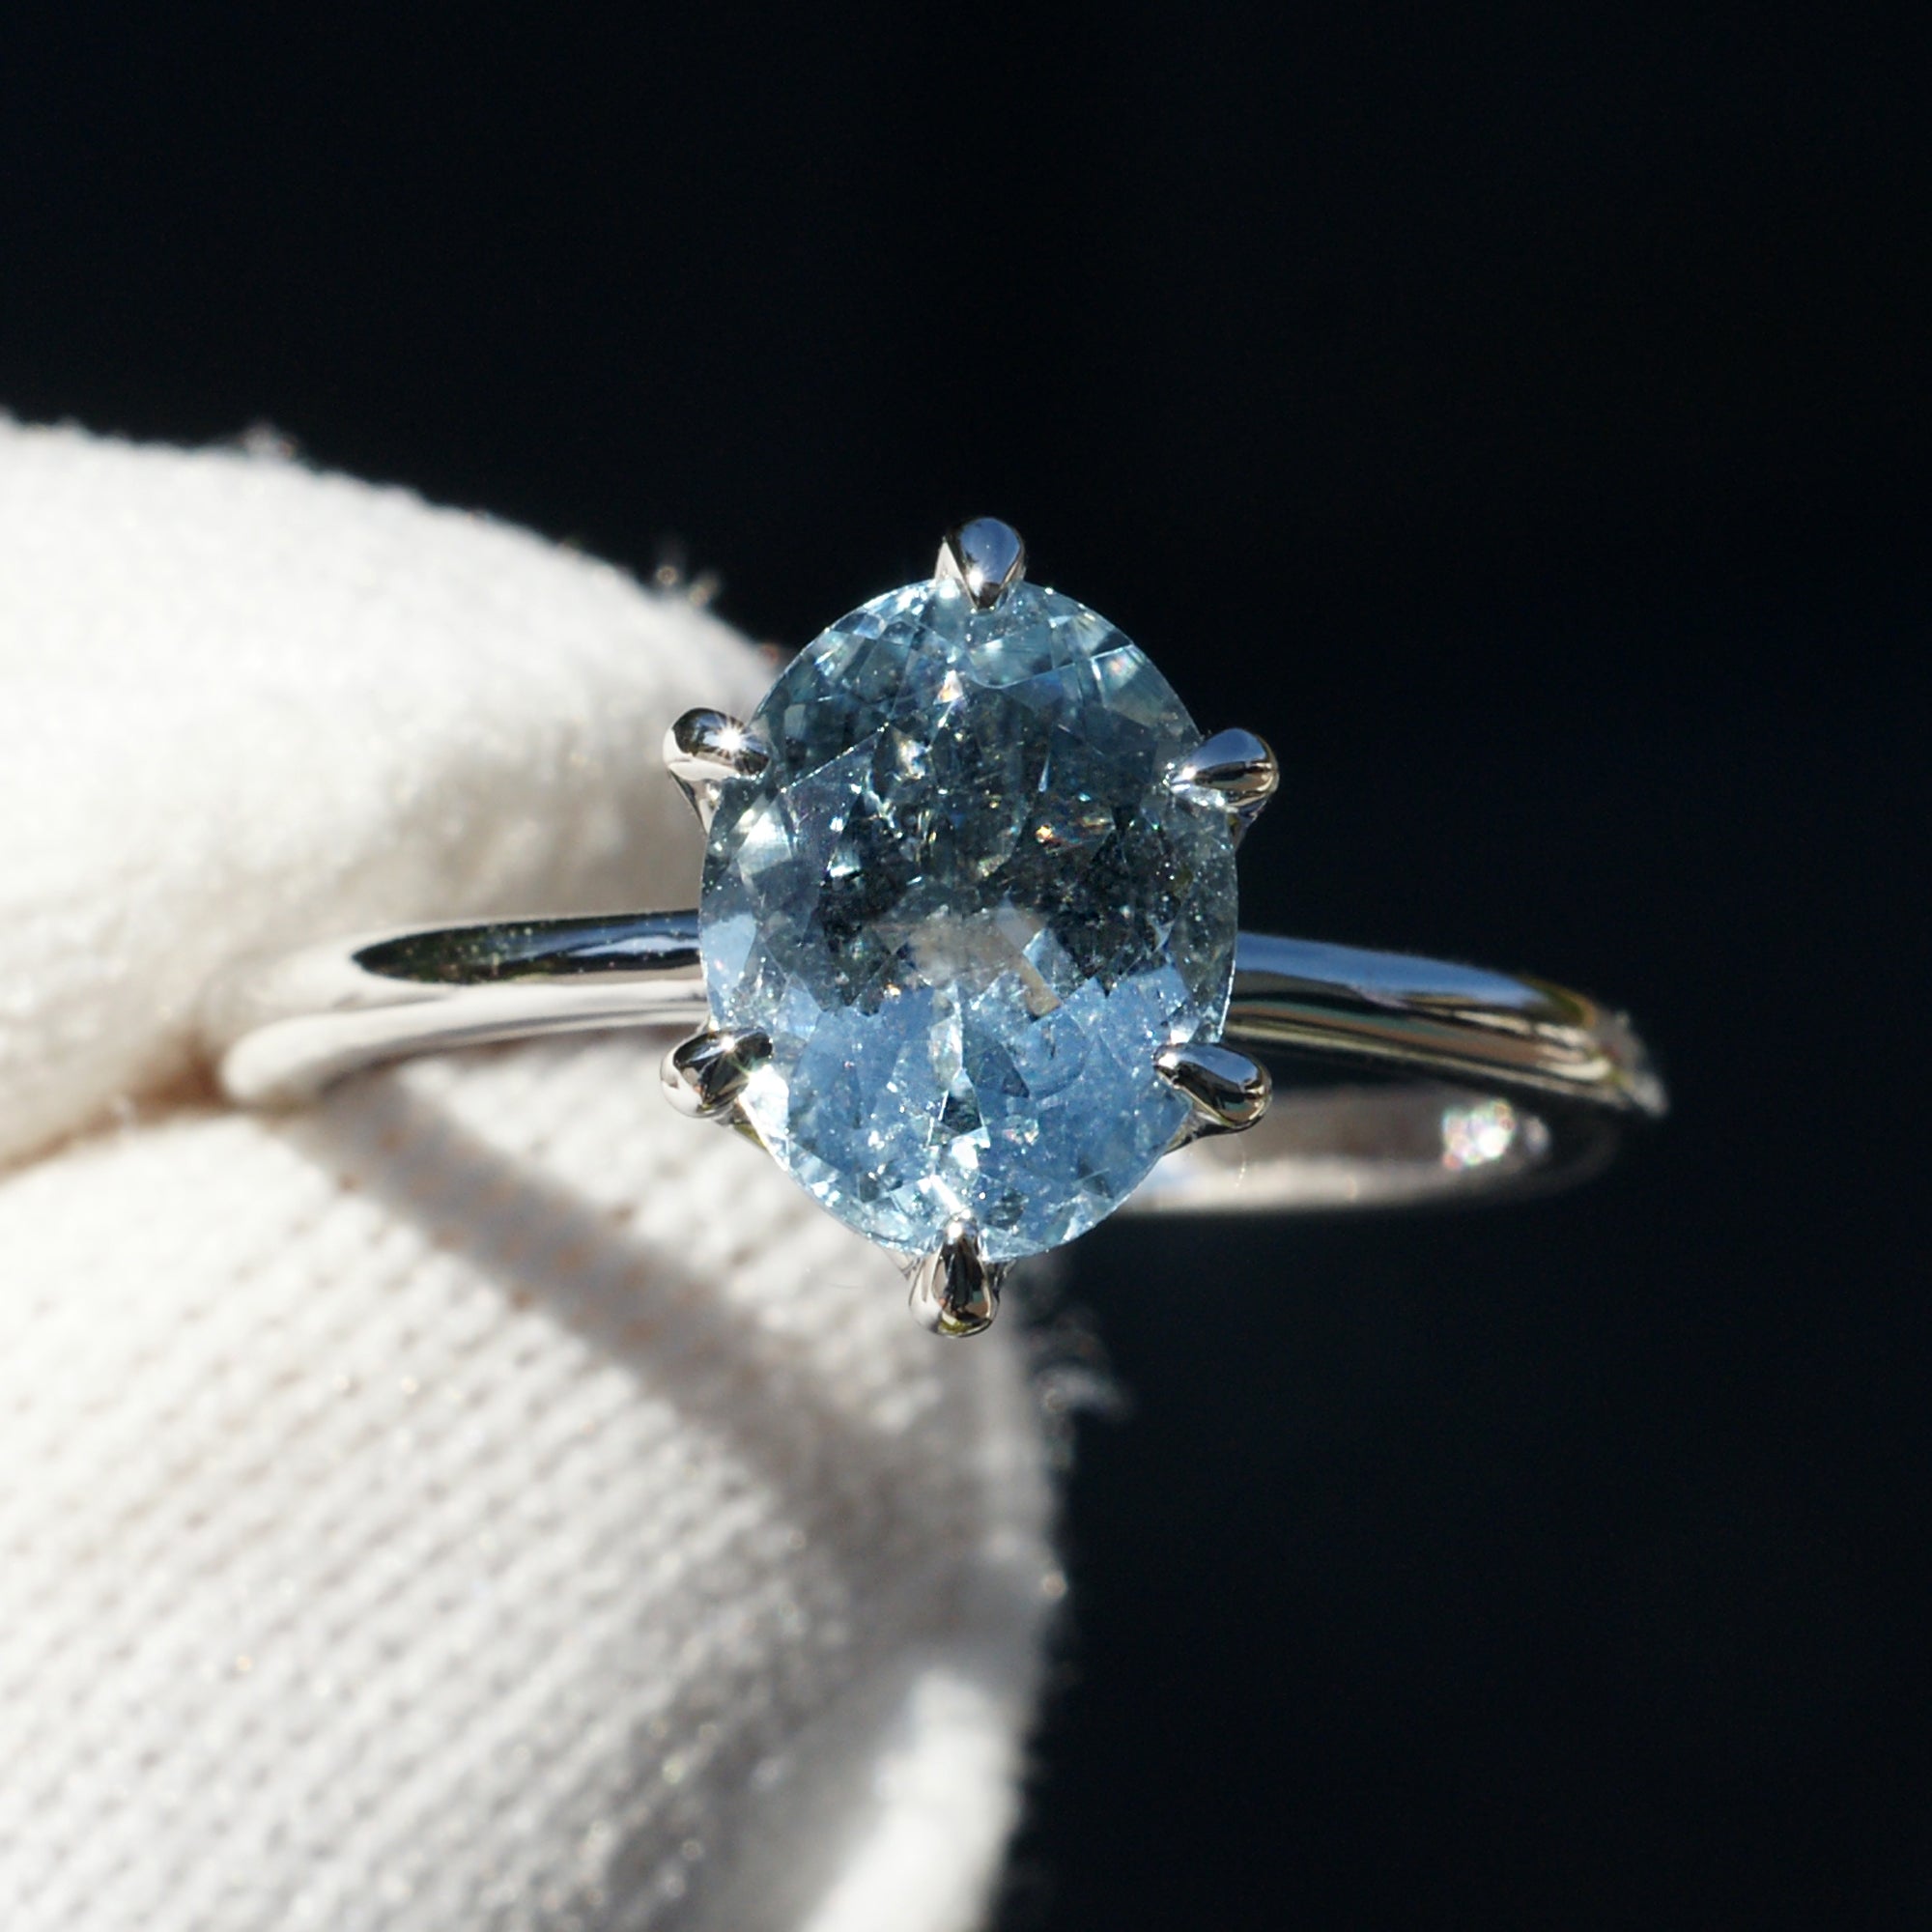 The Oval Crown Aquamarine Ring 9x7mm 14k White Gold